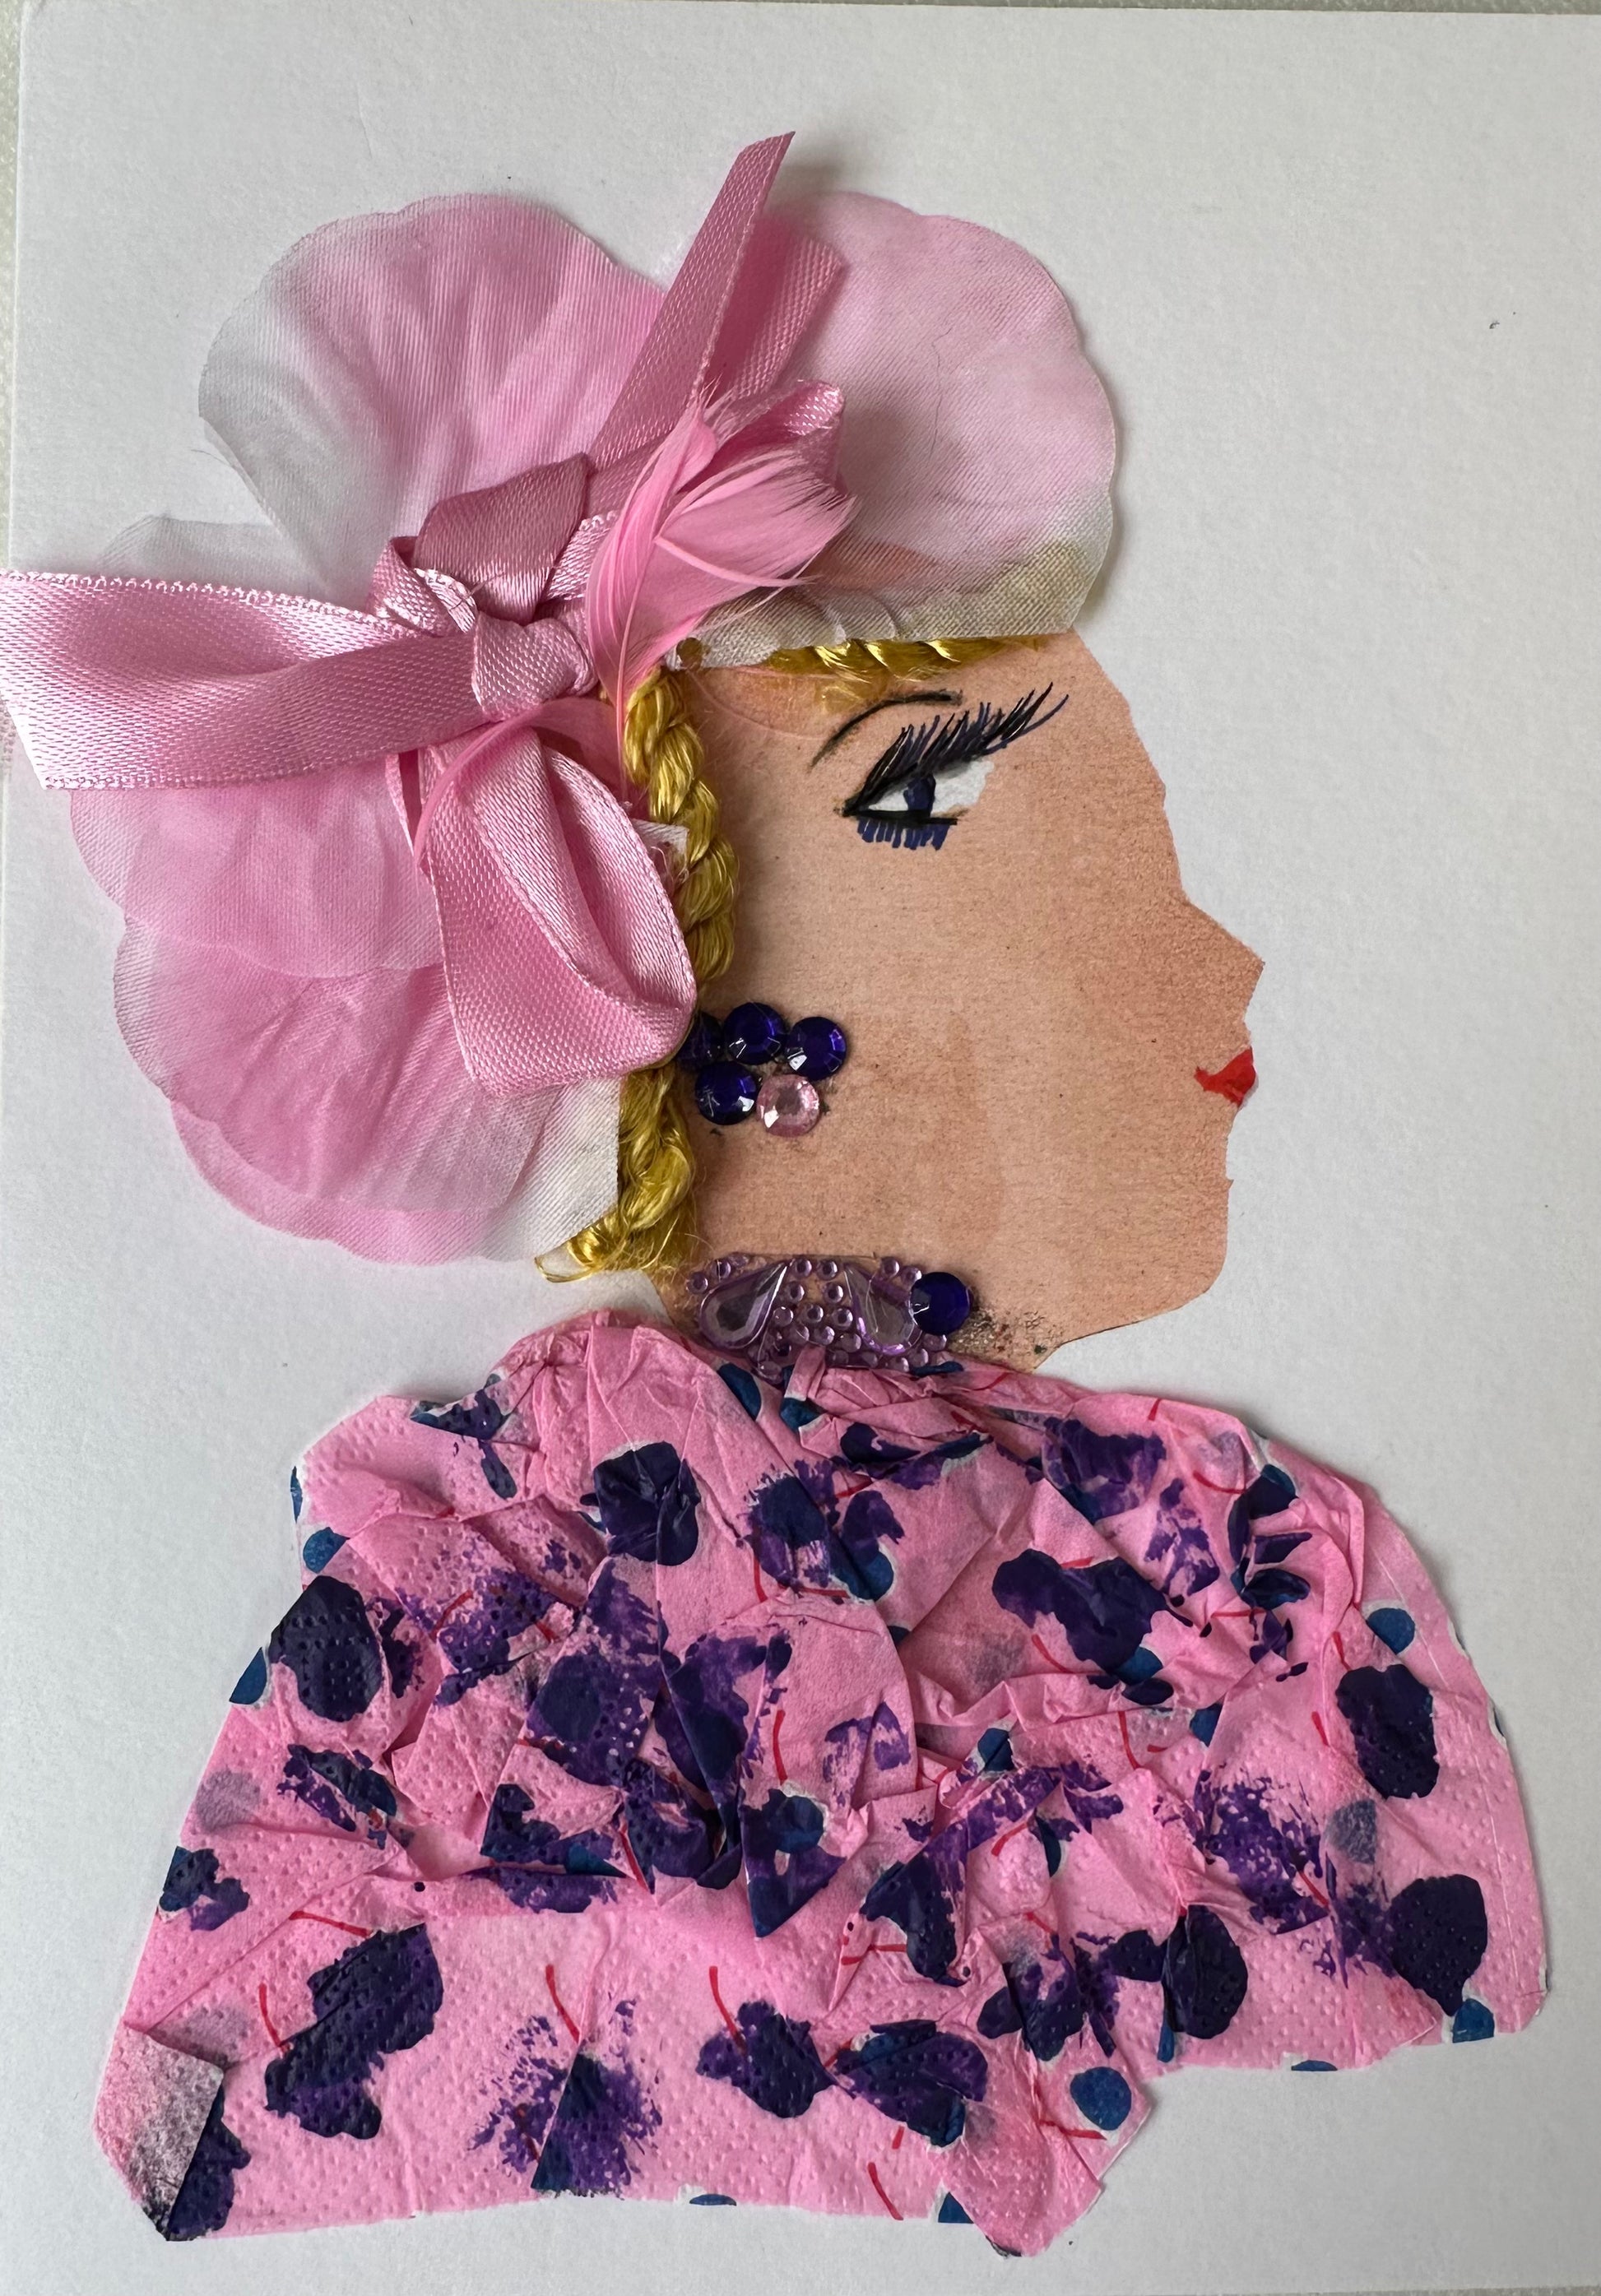 This handmade card of Kensington Kathy illustrates a woman in a pink and blue blouse. She has a hair piece with a pink bow and flower pieces. The outfit is completed with purple and pink gemstone earrings. 